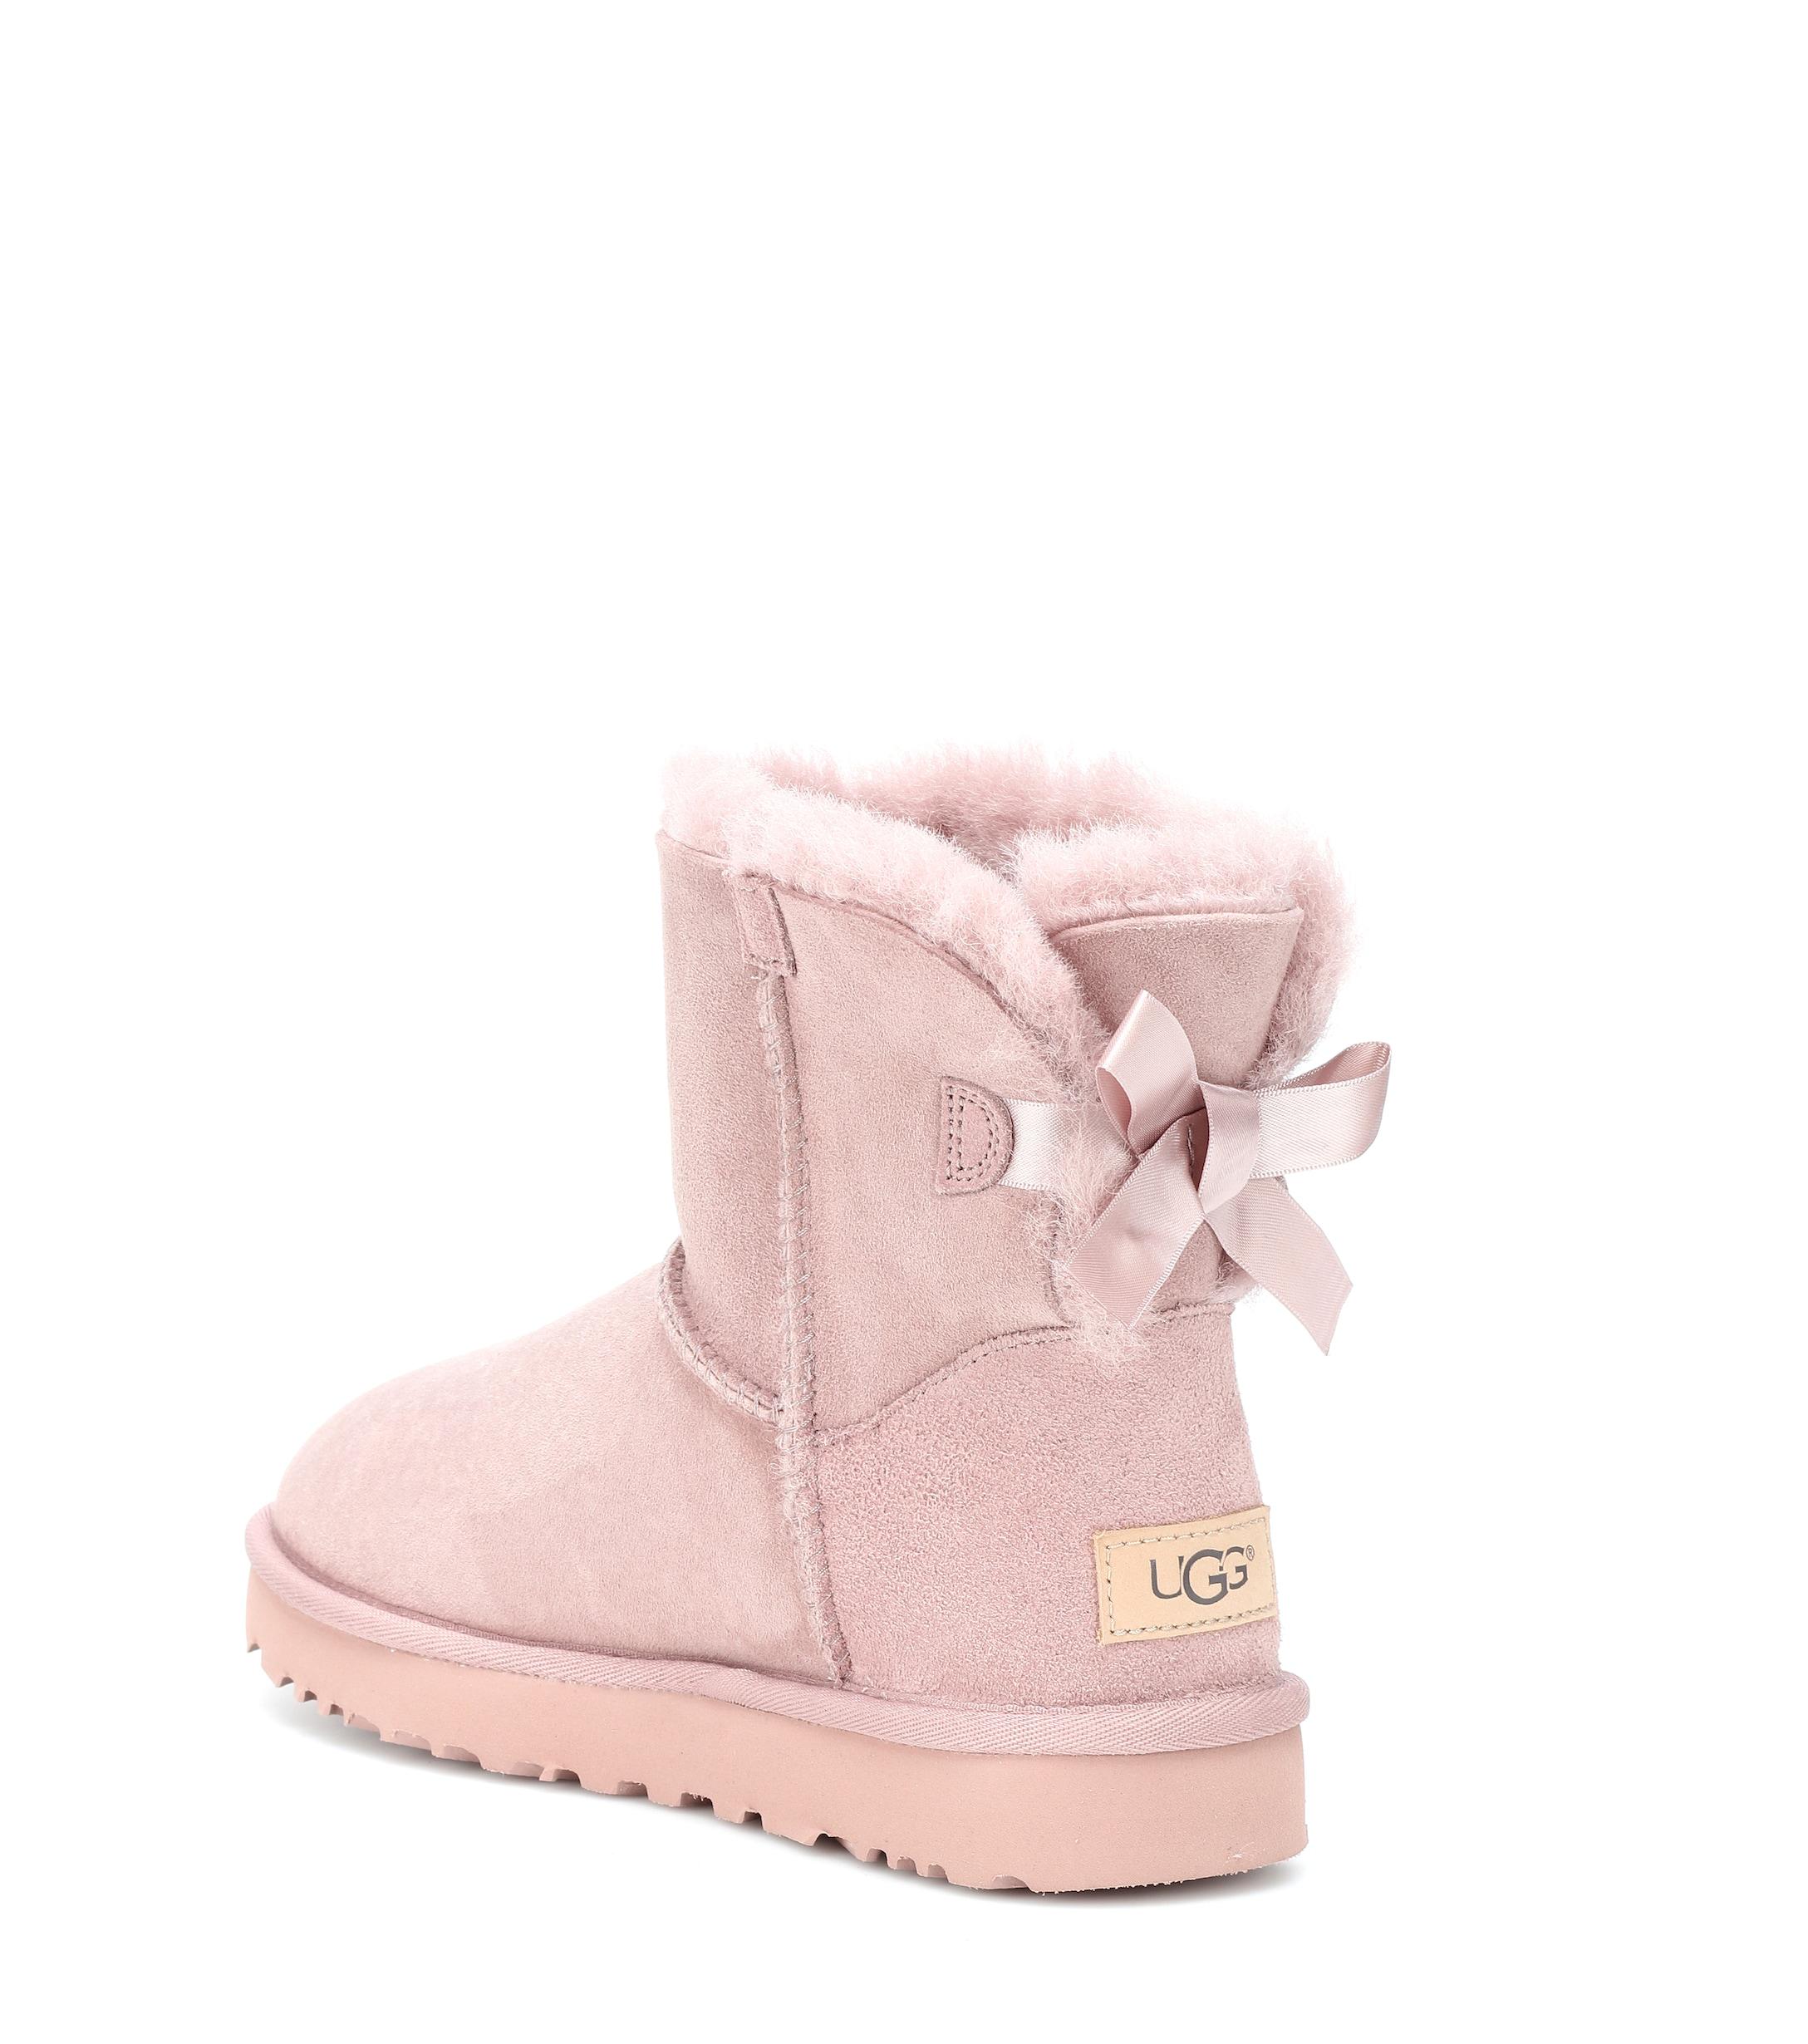 UGG Mini Bailey Bow Ii Suede Boots in Pink - Lyst